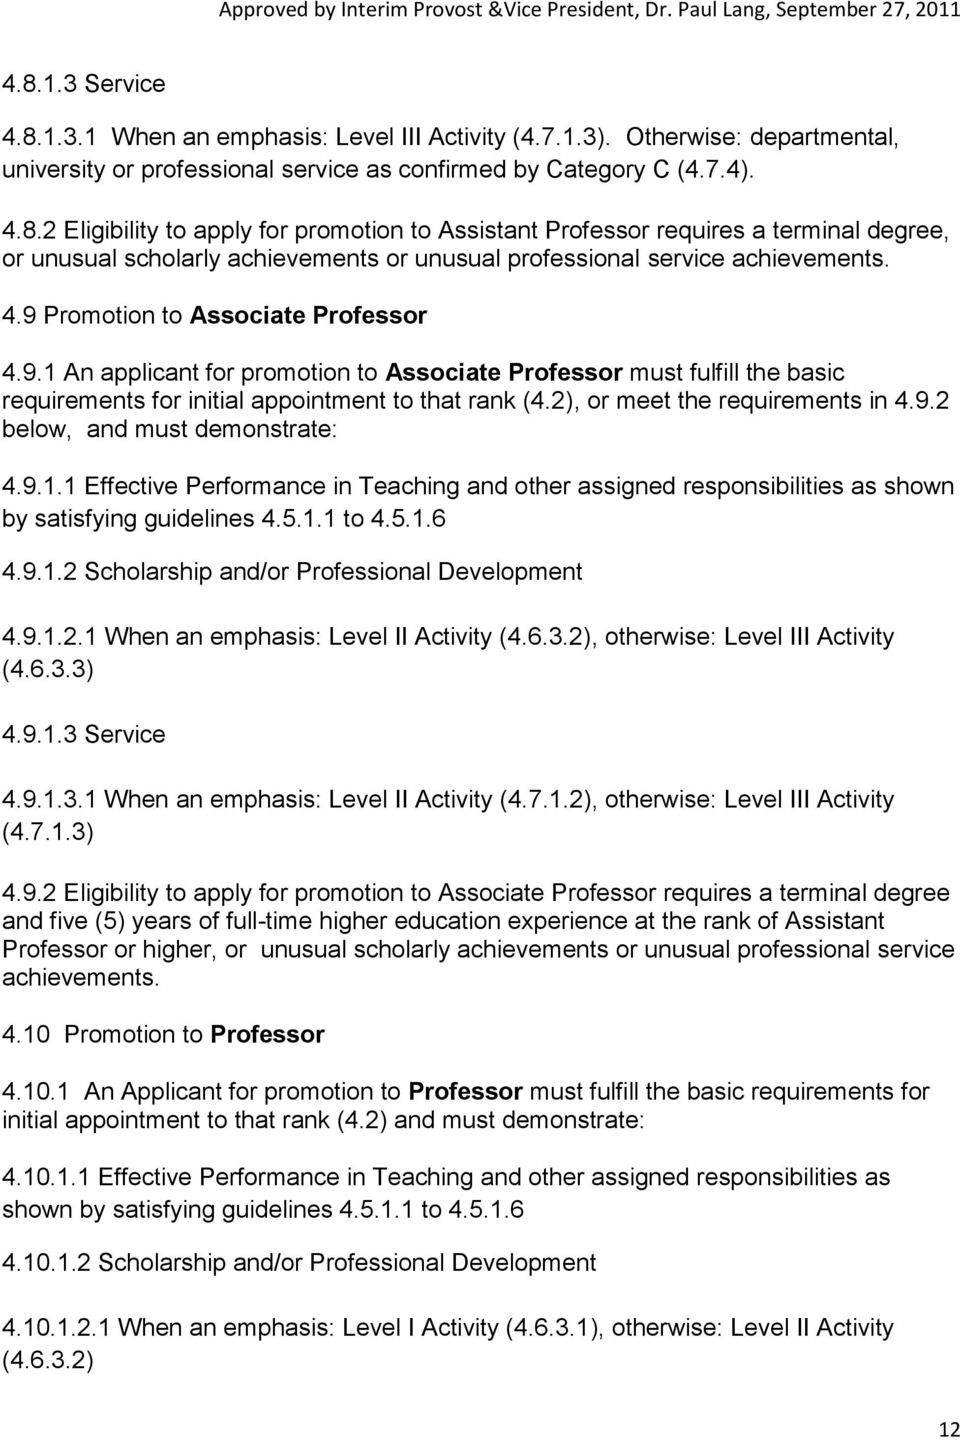 2), or meet the requirements in 4.9.2 below, and must demonstrate: 4.9.1.1 Effective Performance in Teaching and other assigned responsibilities as shown by satisfying guidelines 4.5.1.1 to 4.5.1.6 4.